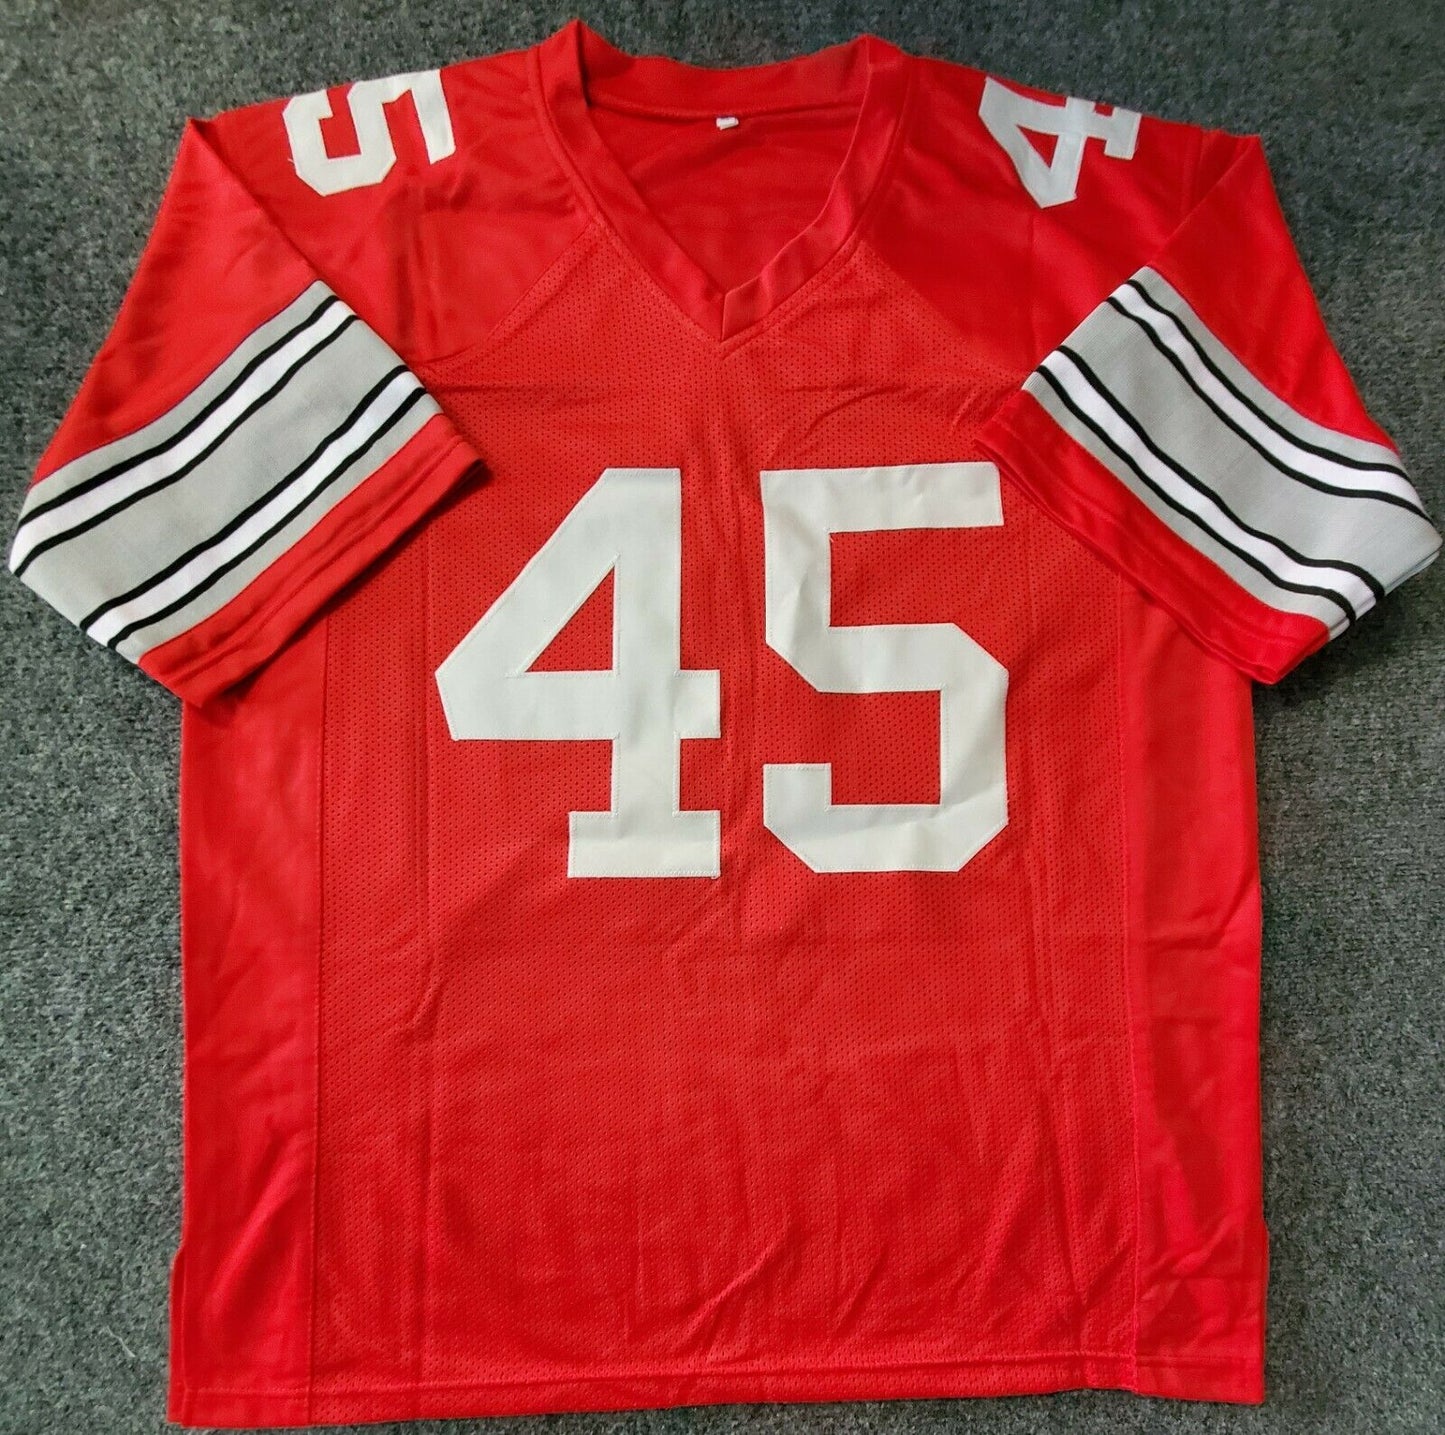 MVP Authentics Ohio State Buckeyes Archie Griffin Signed Inscribed Jersey Beckett Holo 225 sports jersey framing , jersey framing